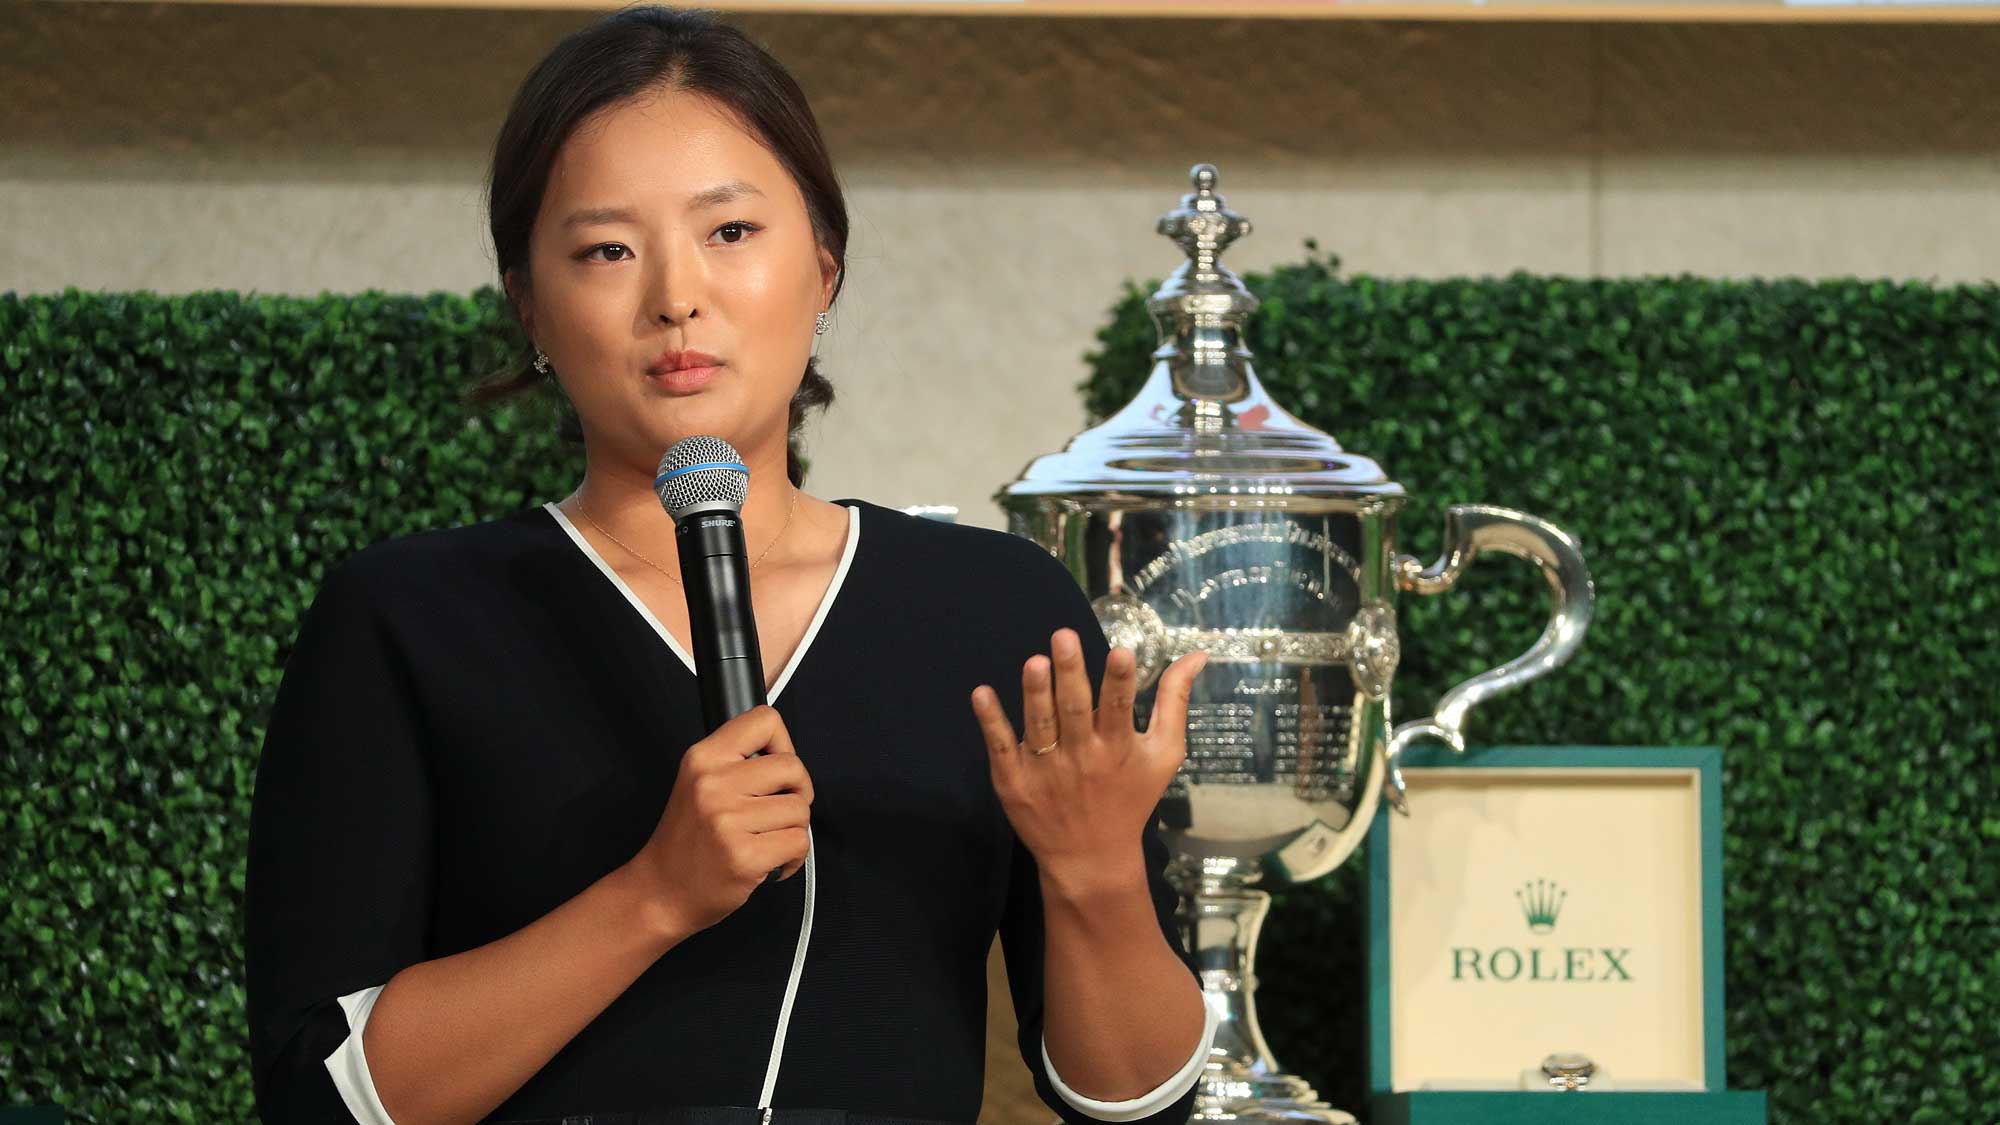 Jin Young Ko of South Korea is presented iwth the Louise Suggs Rolex Rookie of the Year award during the LPGA Rolex Players Awards at the Ritz-Carlton Golf Resort